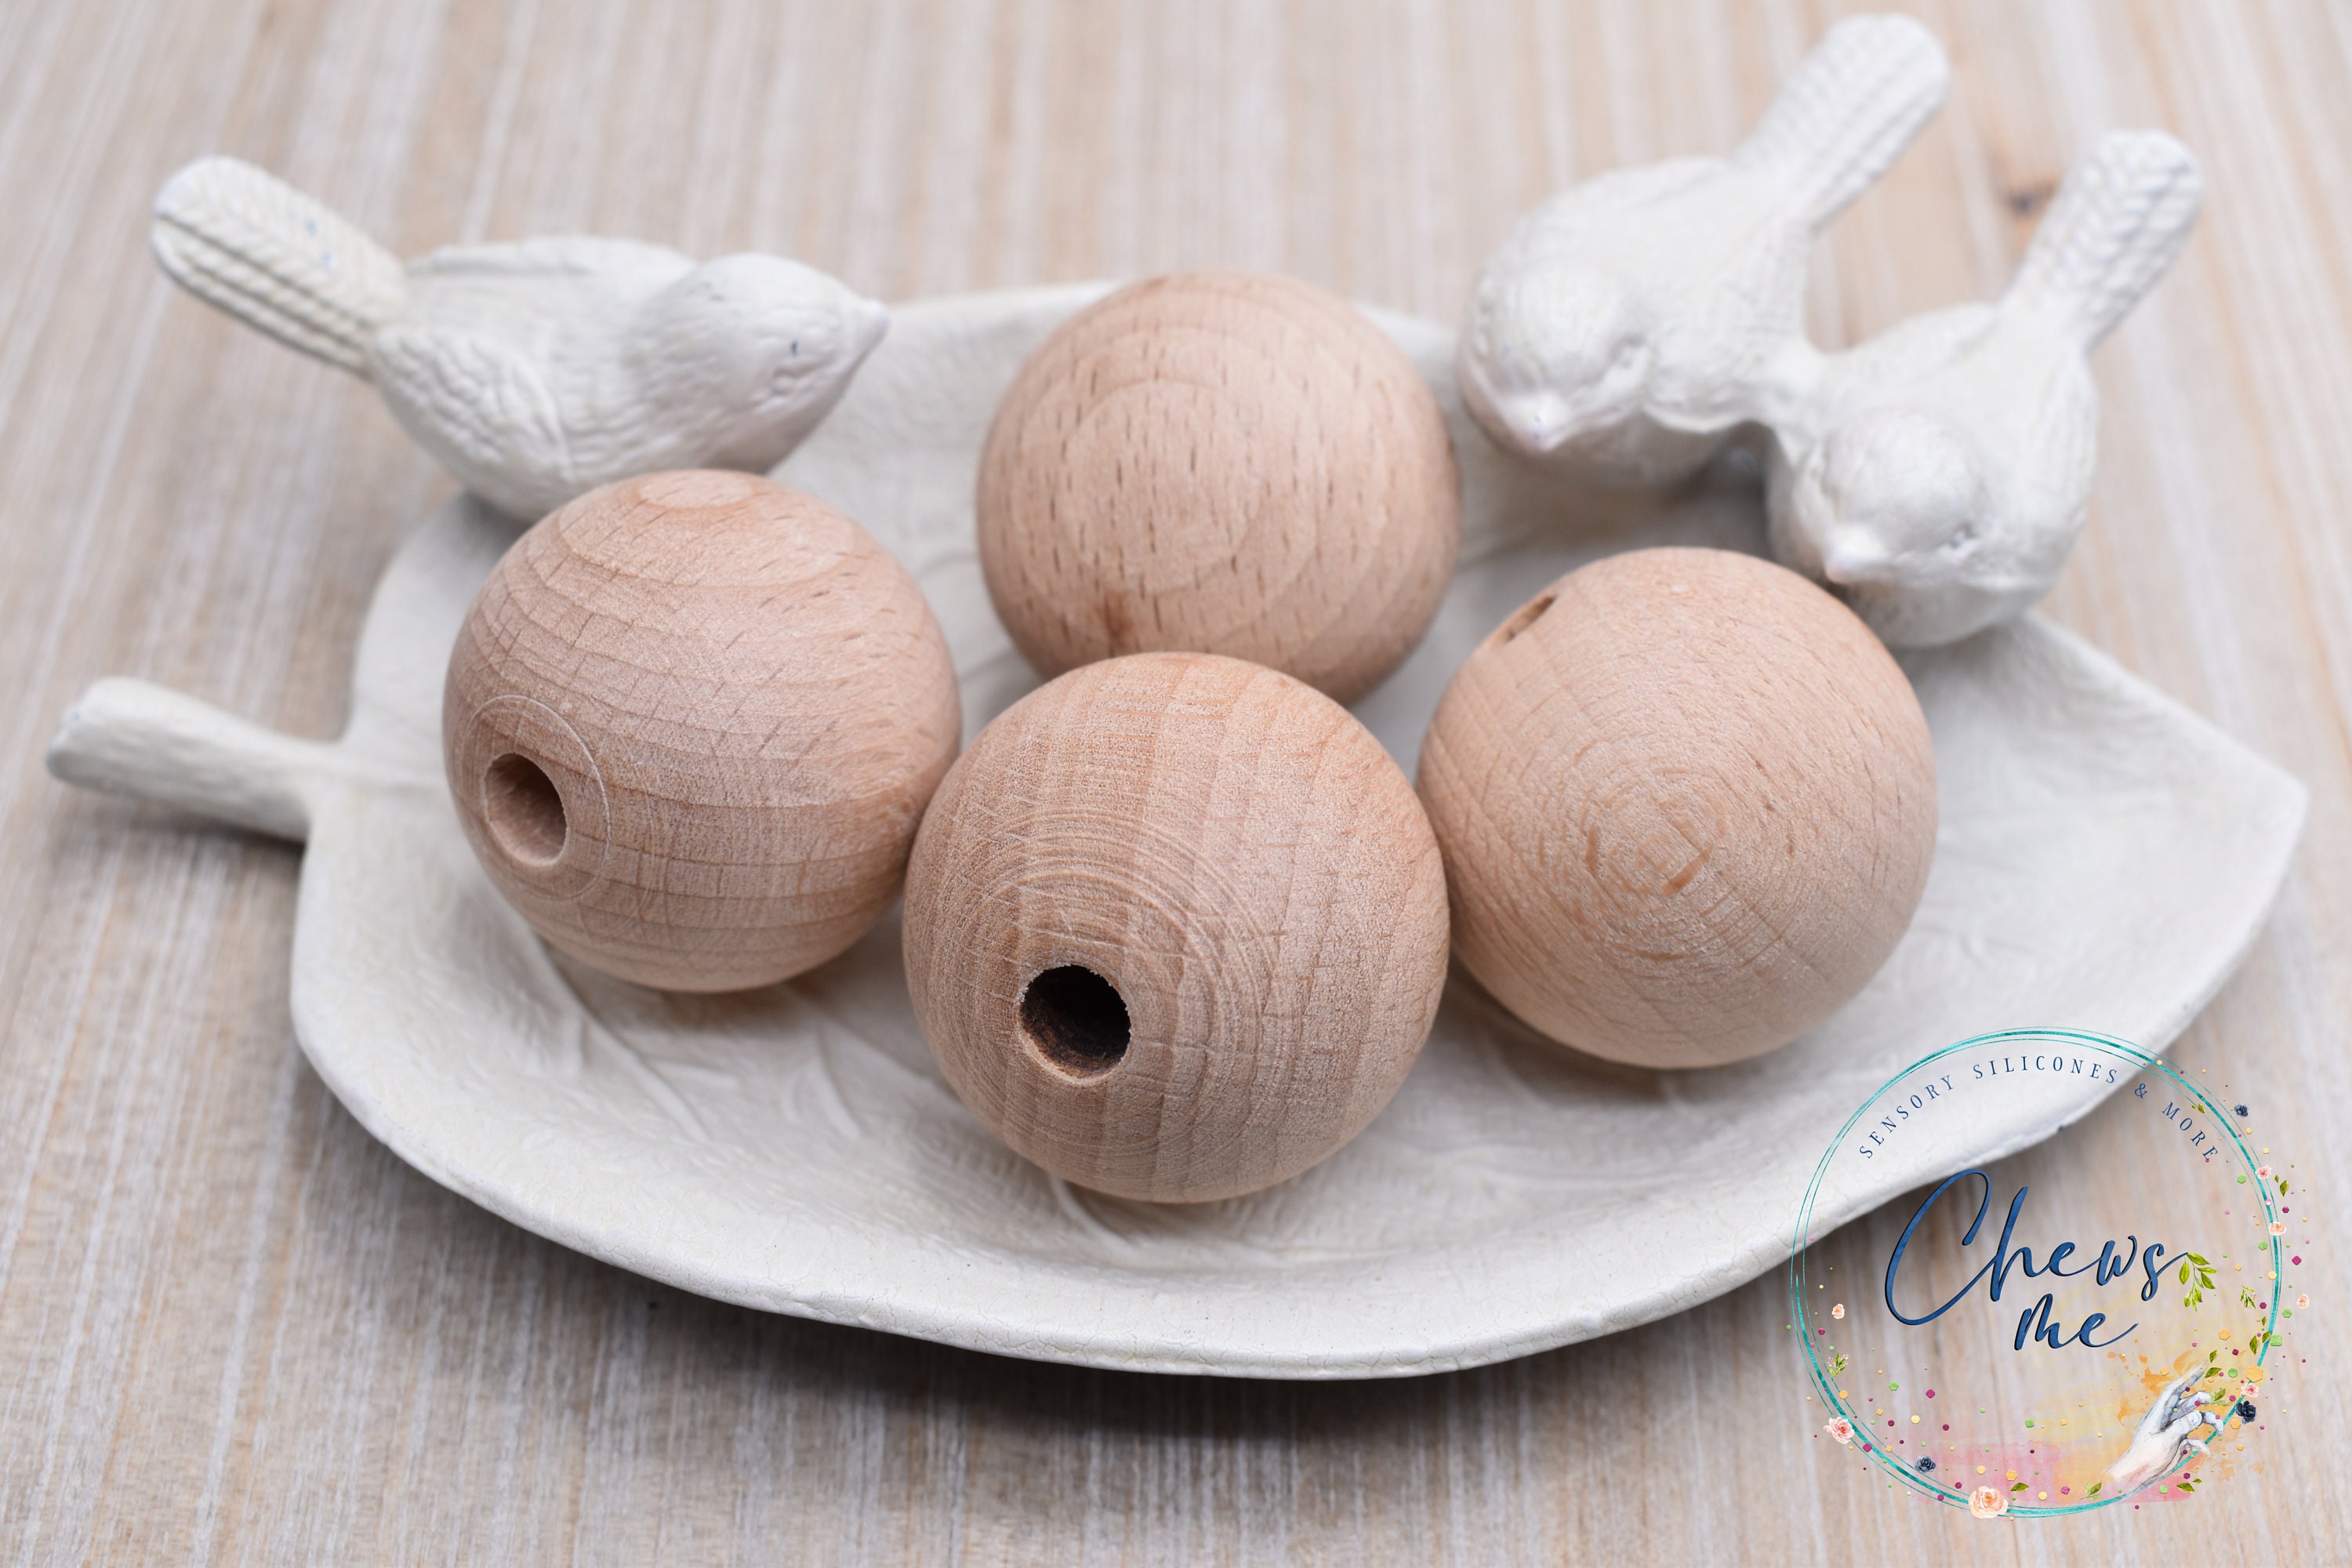 100Pcs Large Natural Wood Beads Bulk 30mm Unfinished Beads Original Round  Balls Wooden Craft Loose Beads Wood Spheres Spacer Bead 16mm 20mm 25mm for